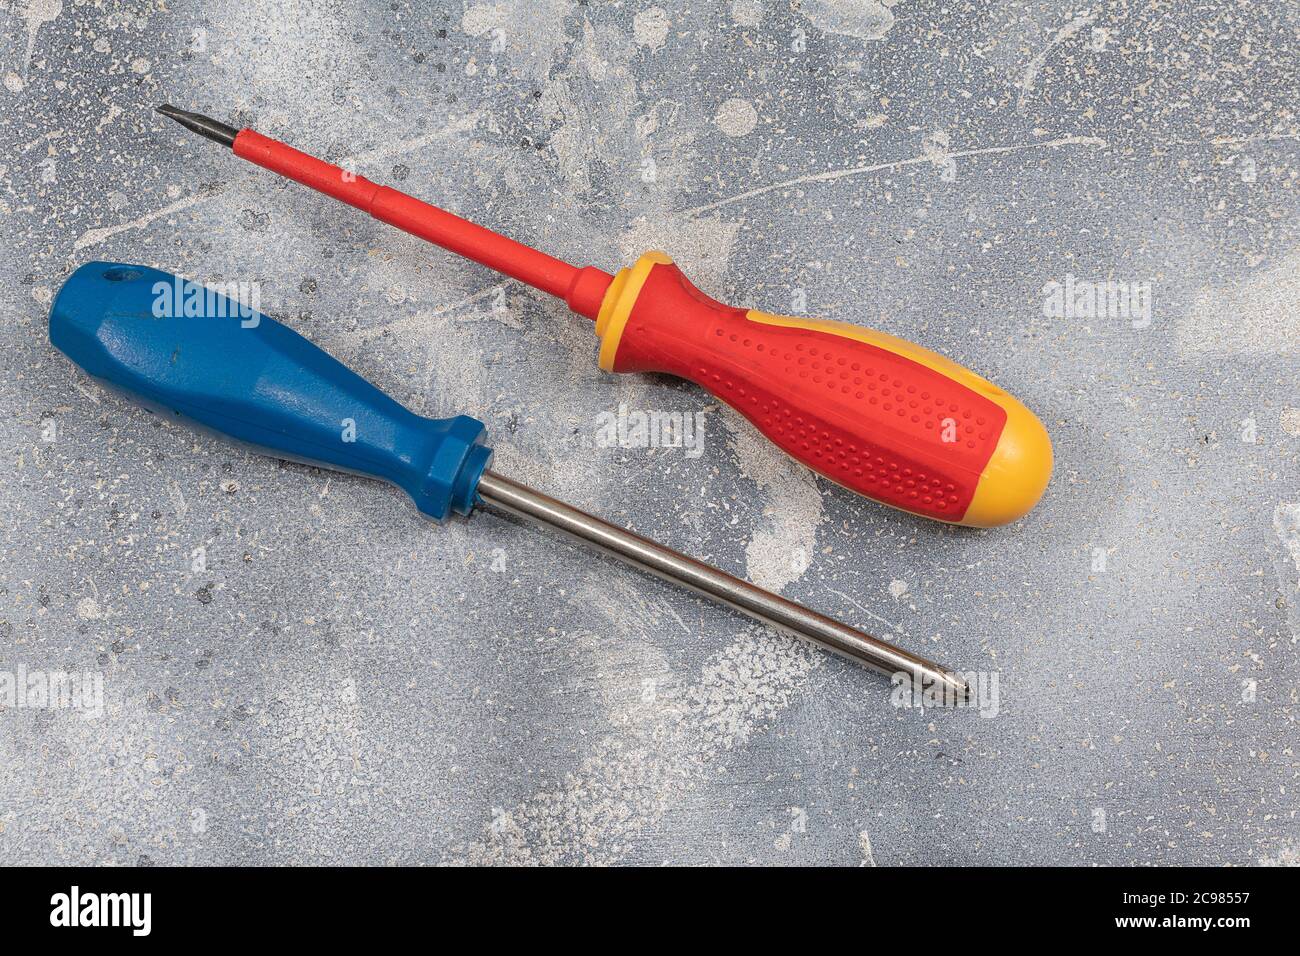 One Phillip and one Standard cabinet tip screwdriver, ergonomically designed, efficient hand-tool for turning -driving- screws, isolated close-up on r Stock Photo